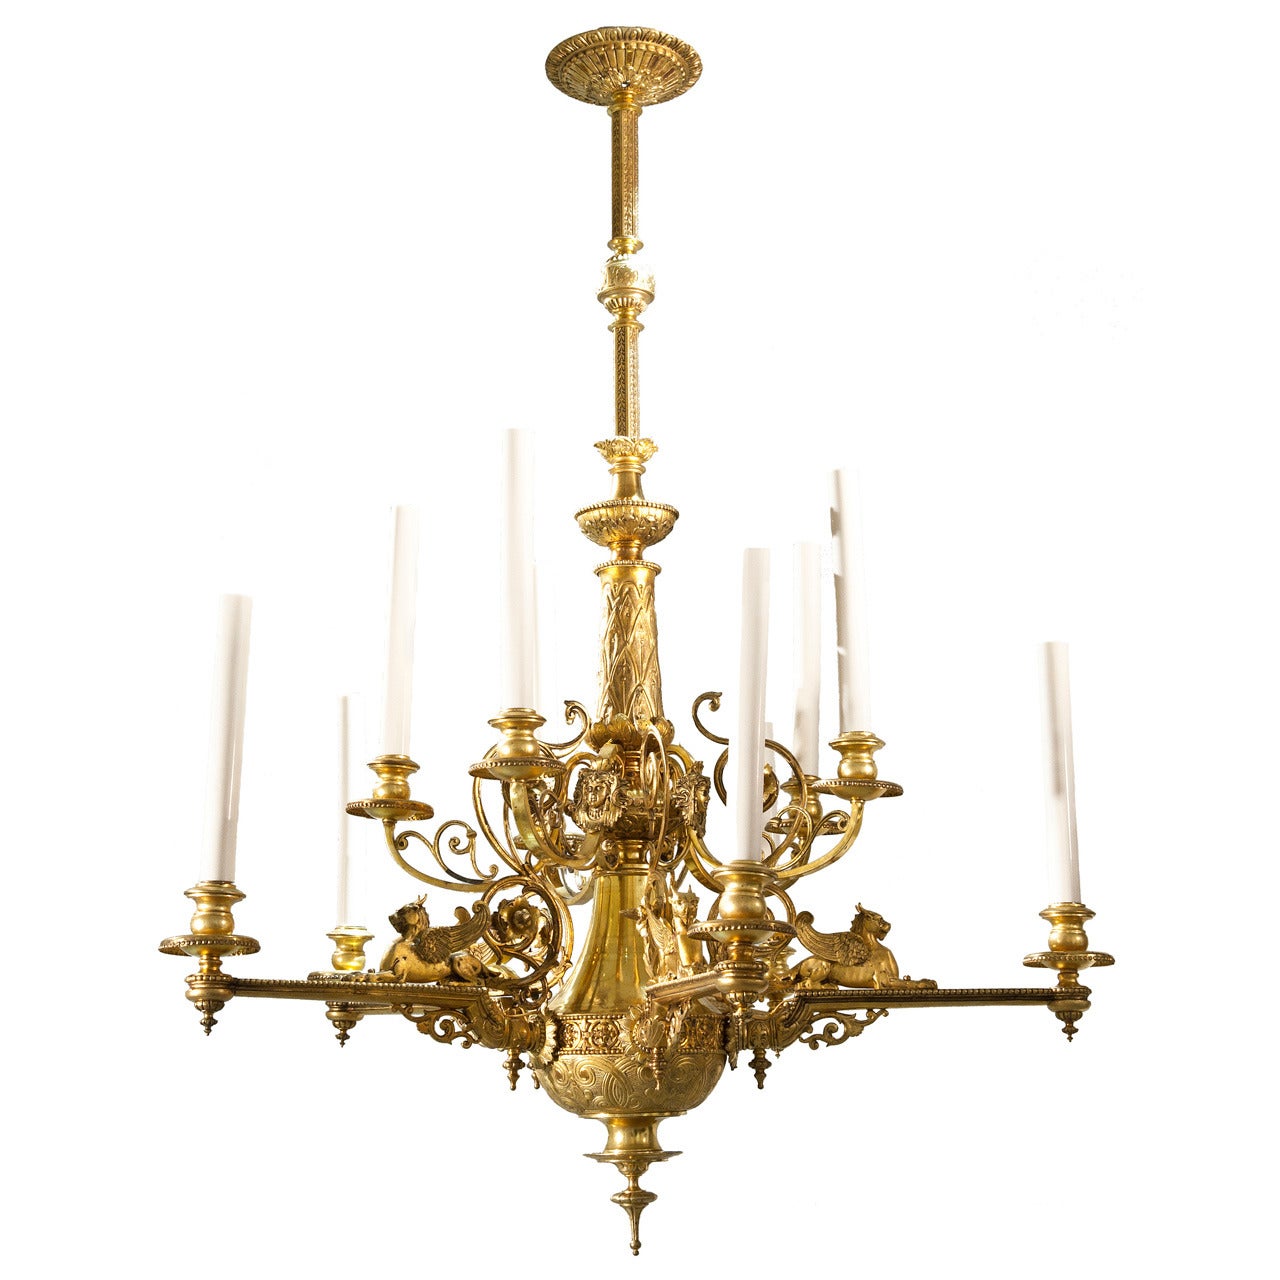 Thomas Messenger & Sons Chandelier Featuring Leonine Dragons